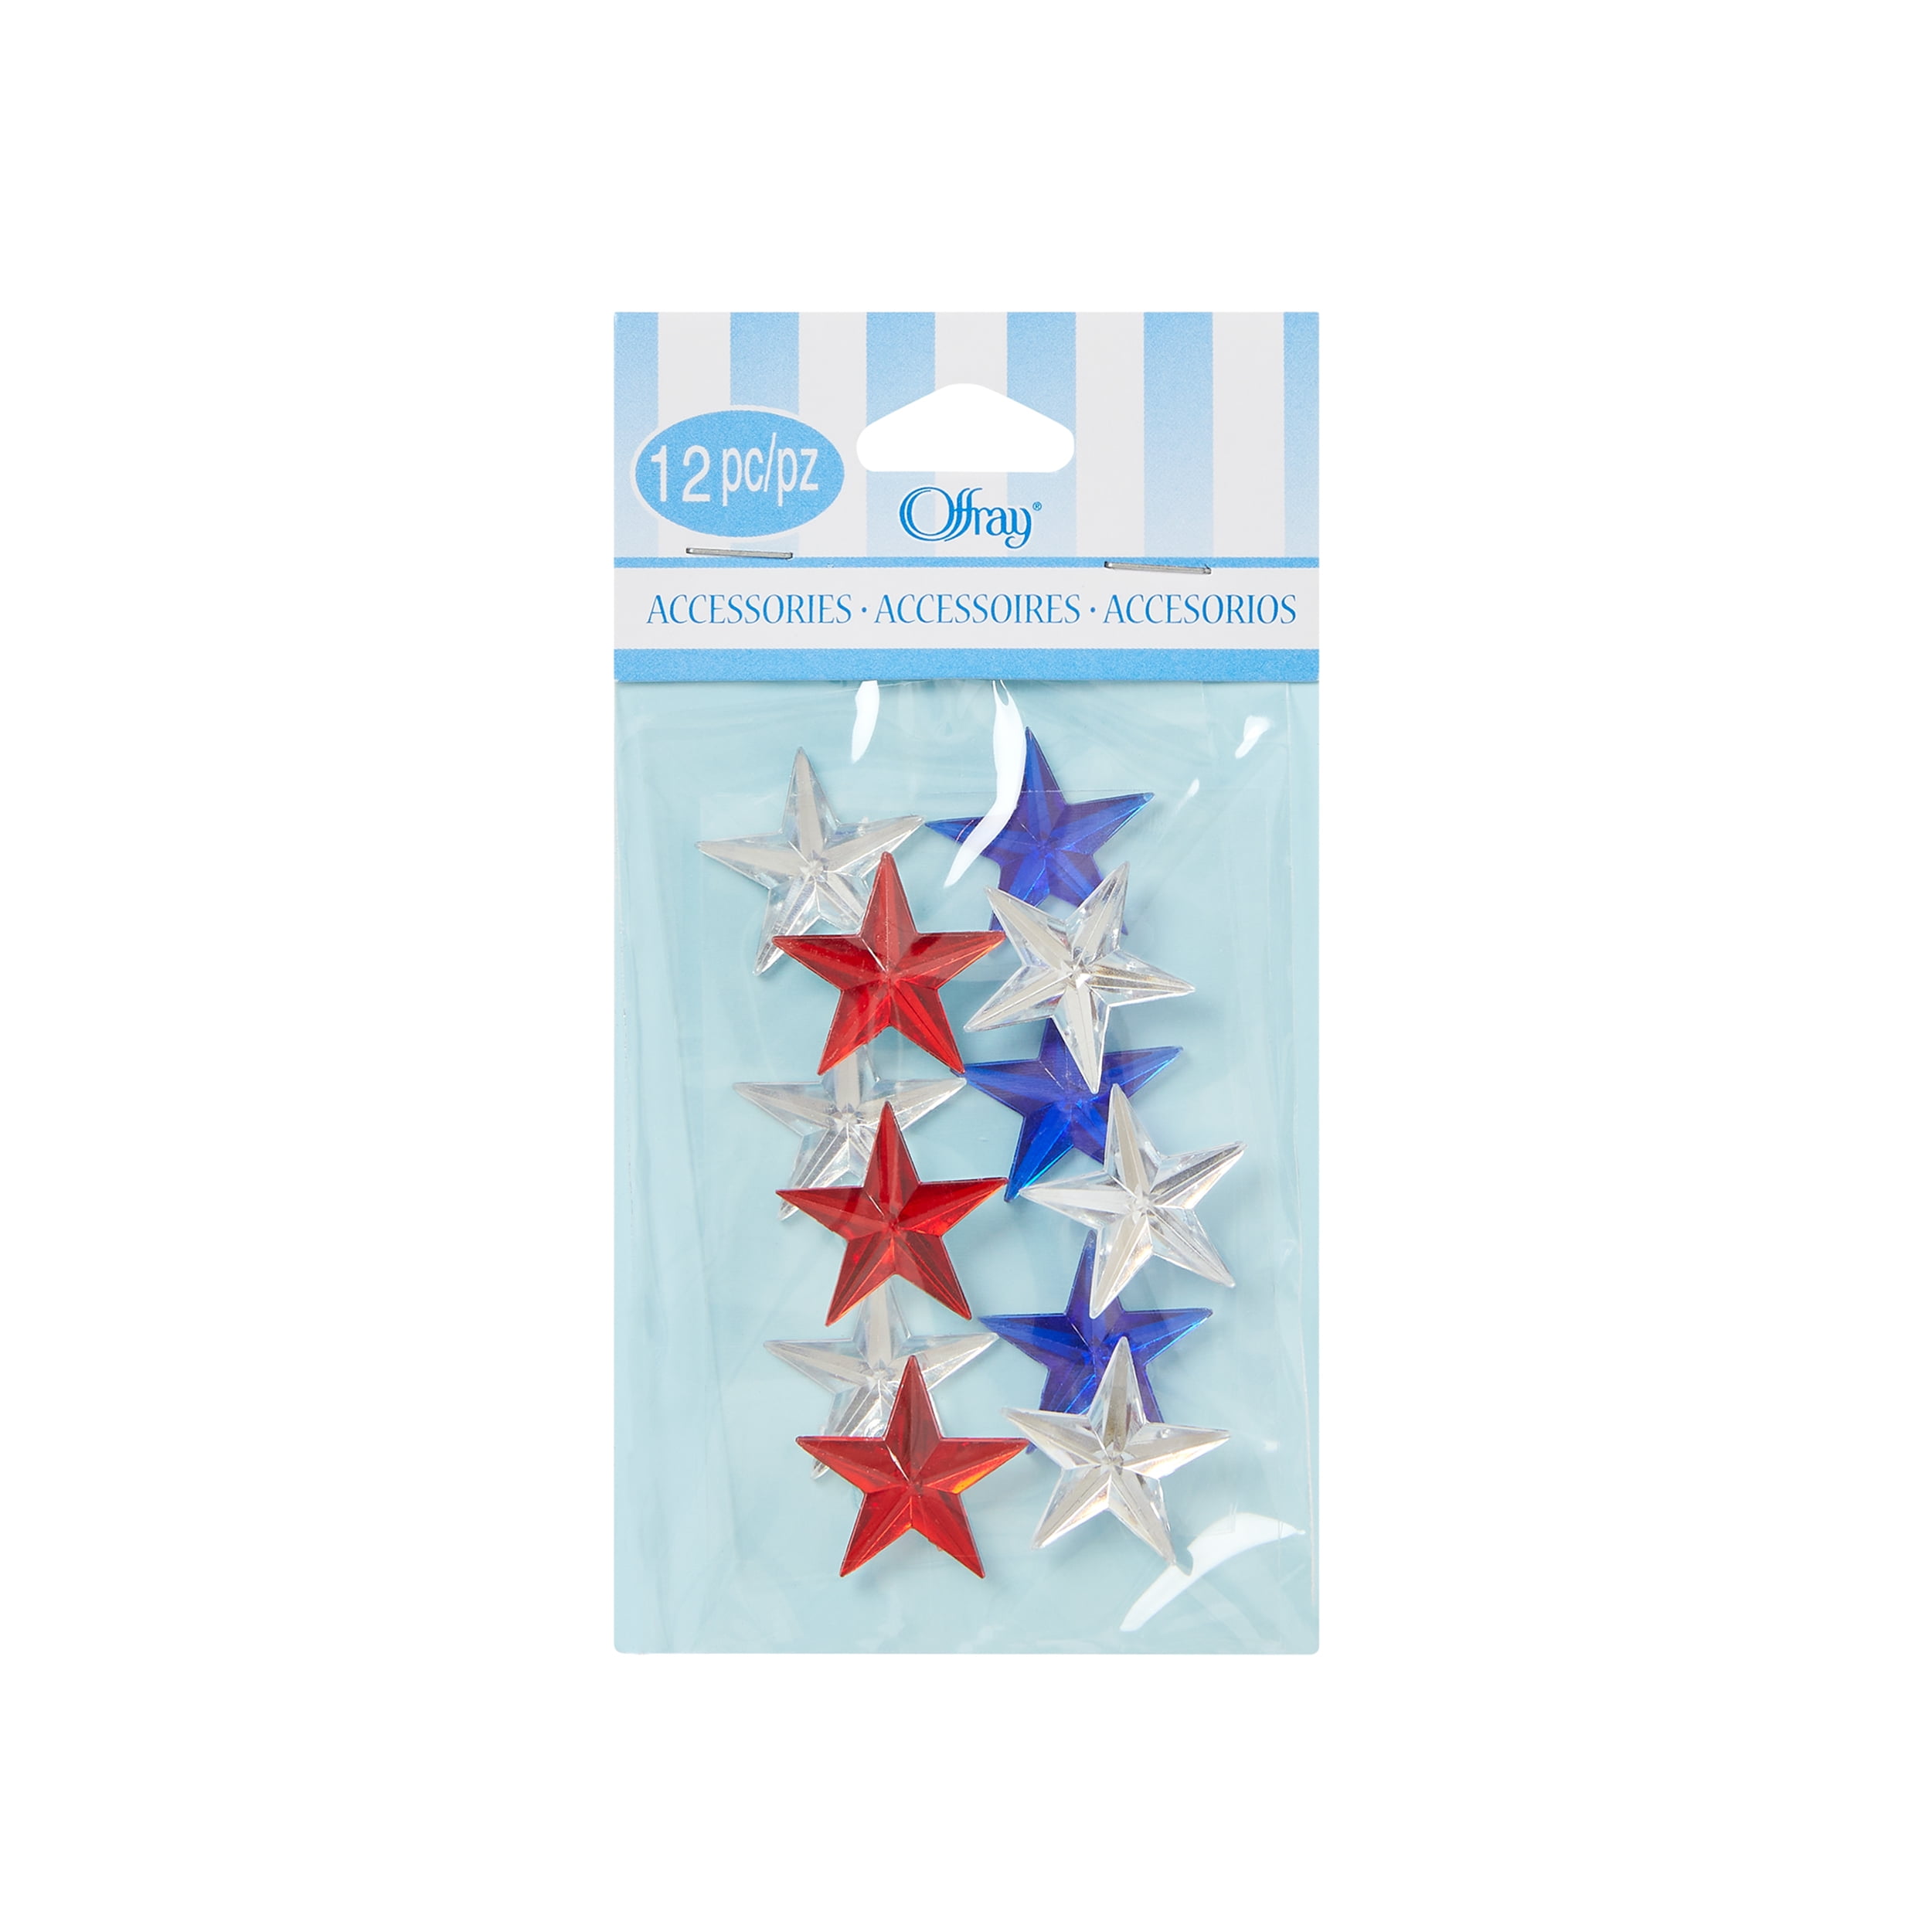 Offray Embellishment, Red, White, and Blue Adhesive Stars, Pack of 12